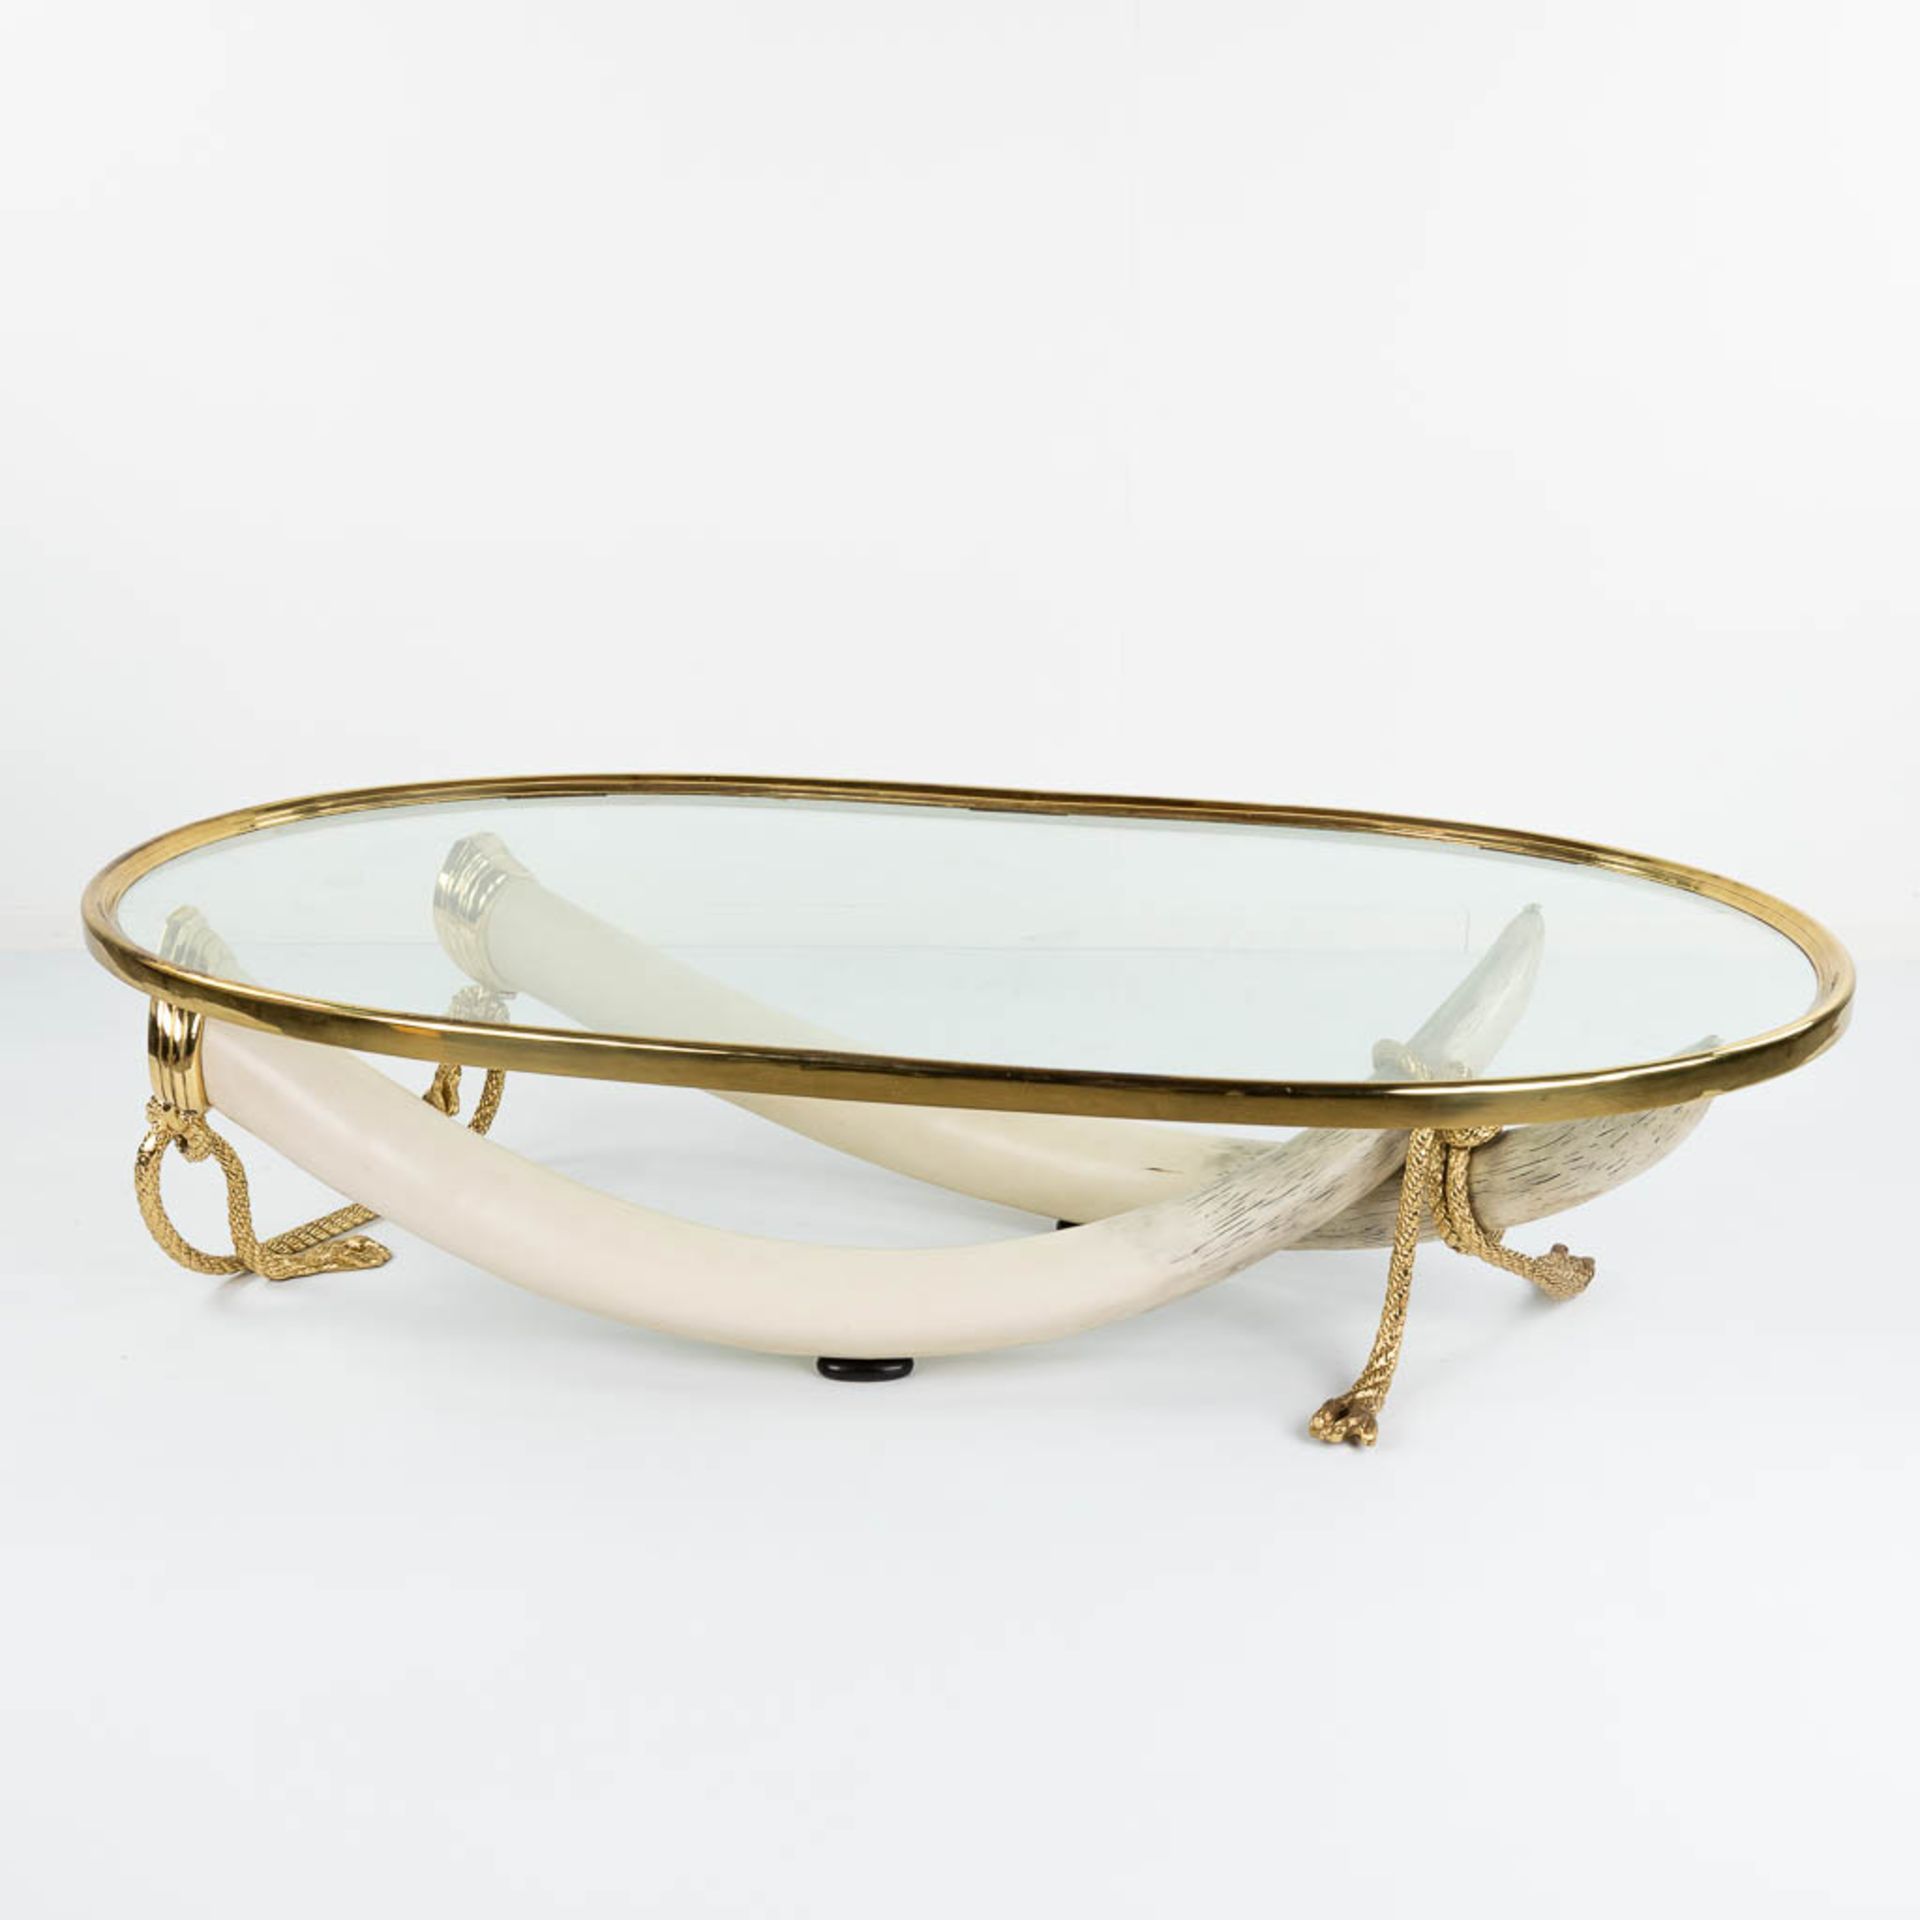 Valenti ' COLMILLOS', a coffee table with elephant tusks and glass in Hollywood Regency style. (L: 1